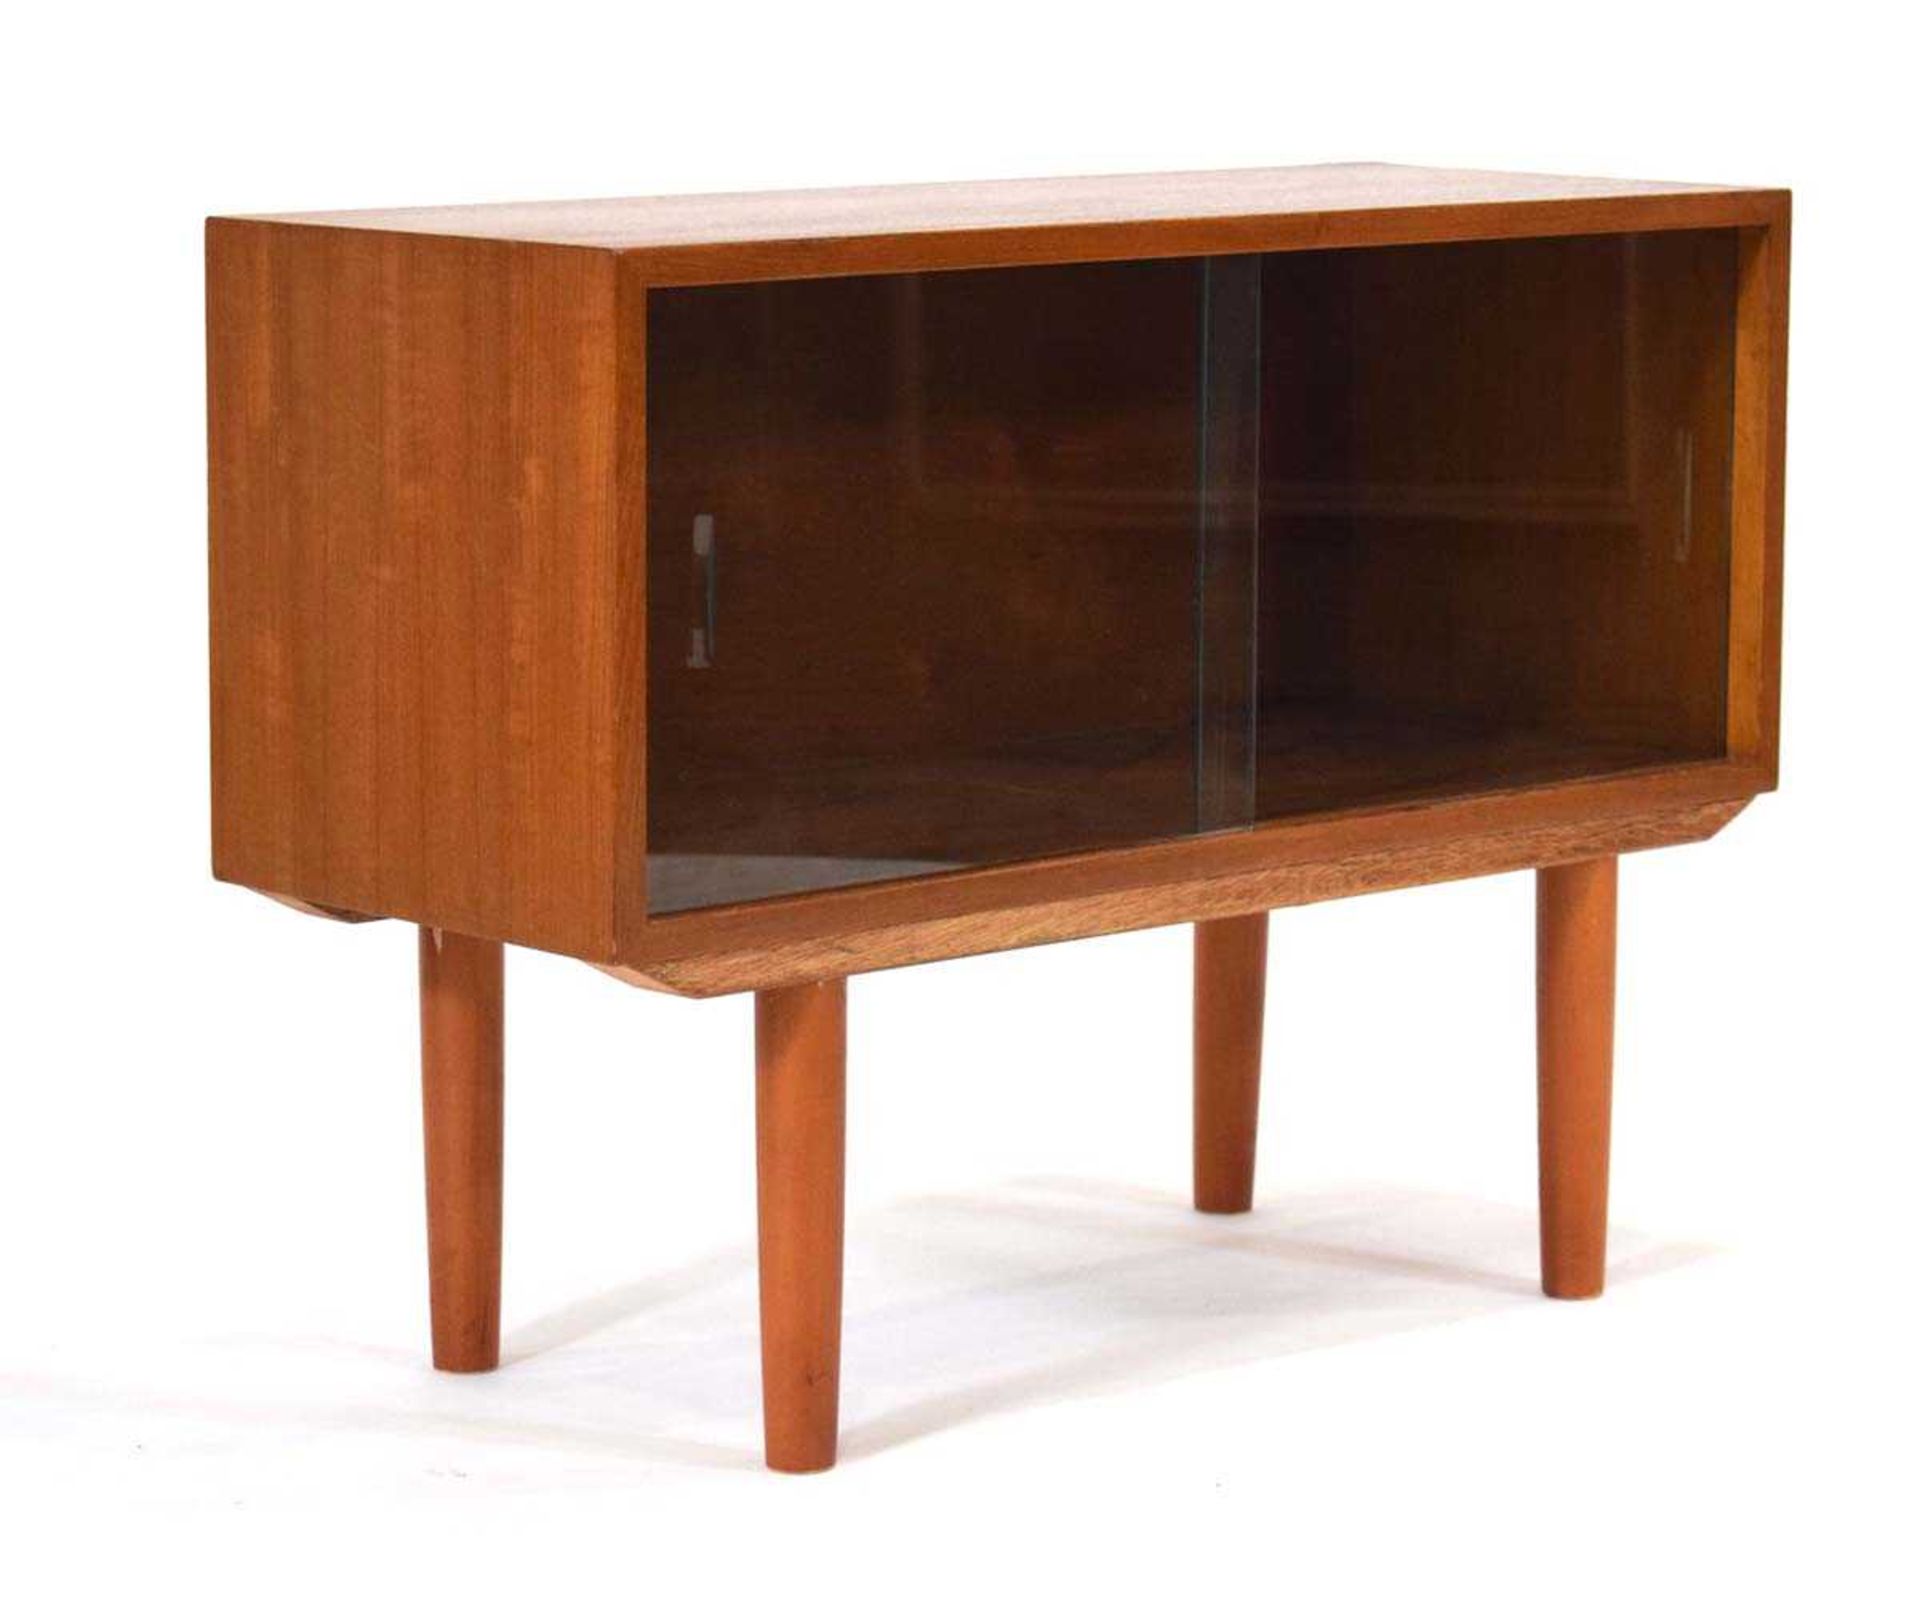 A 1960/70's teak cabinet with two glazed sliding doors, on later turned legs, 76 x 26 x 59 cm